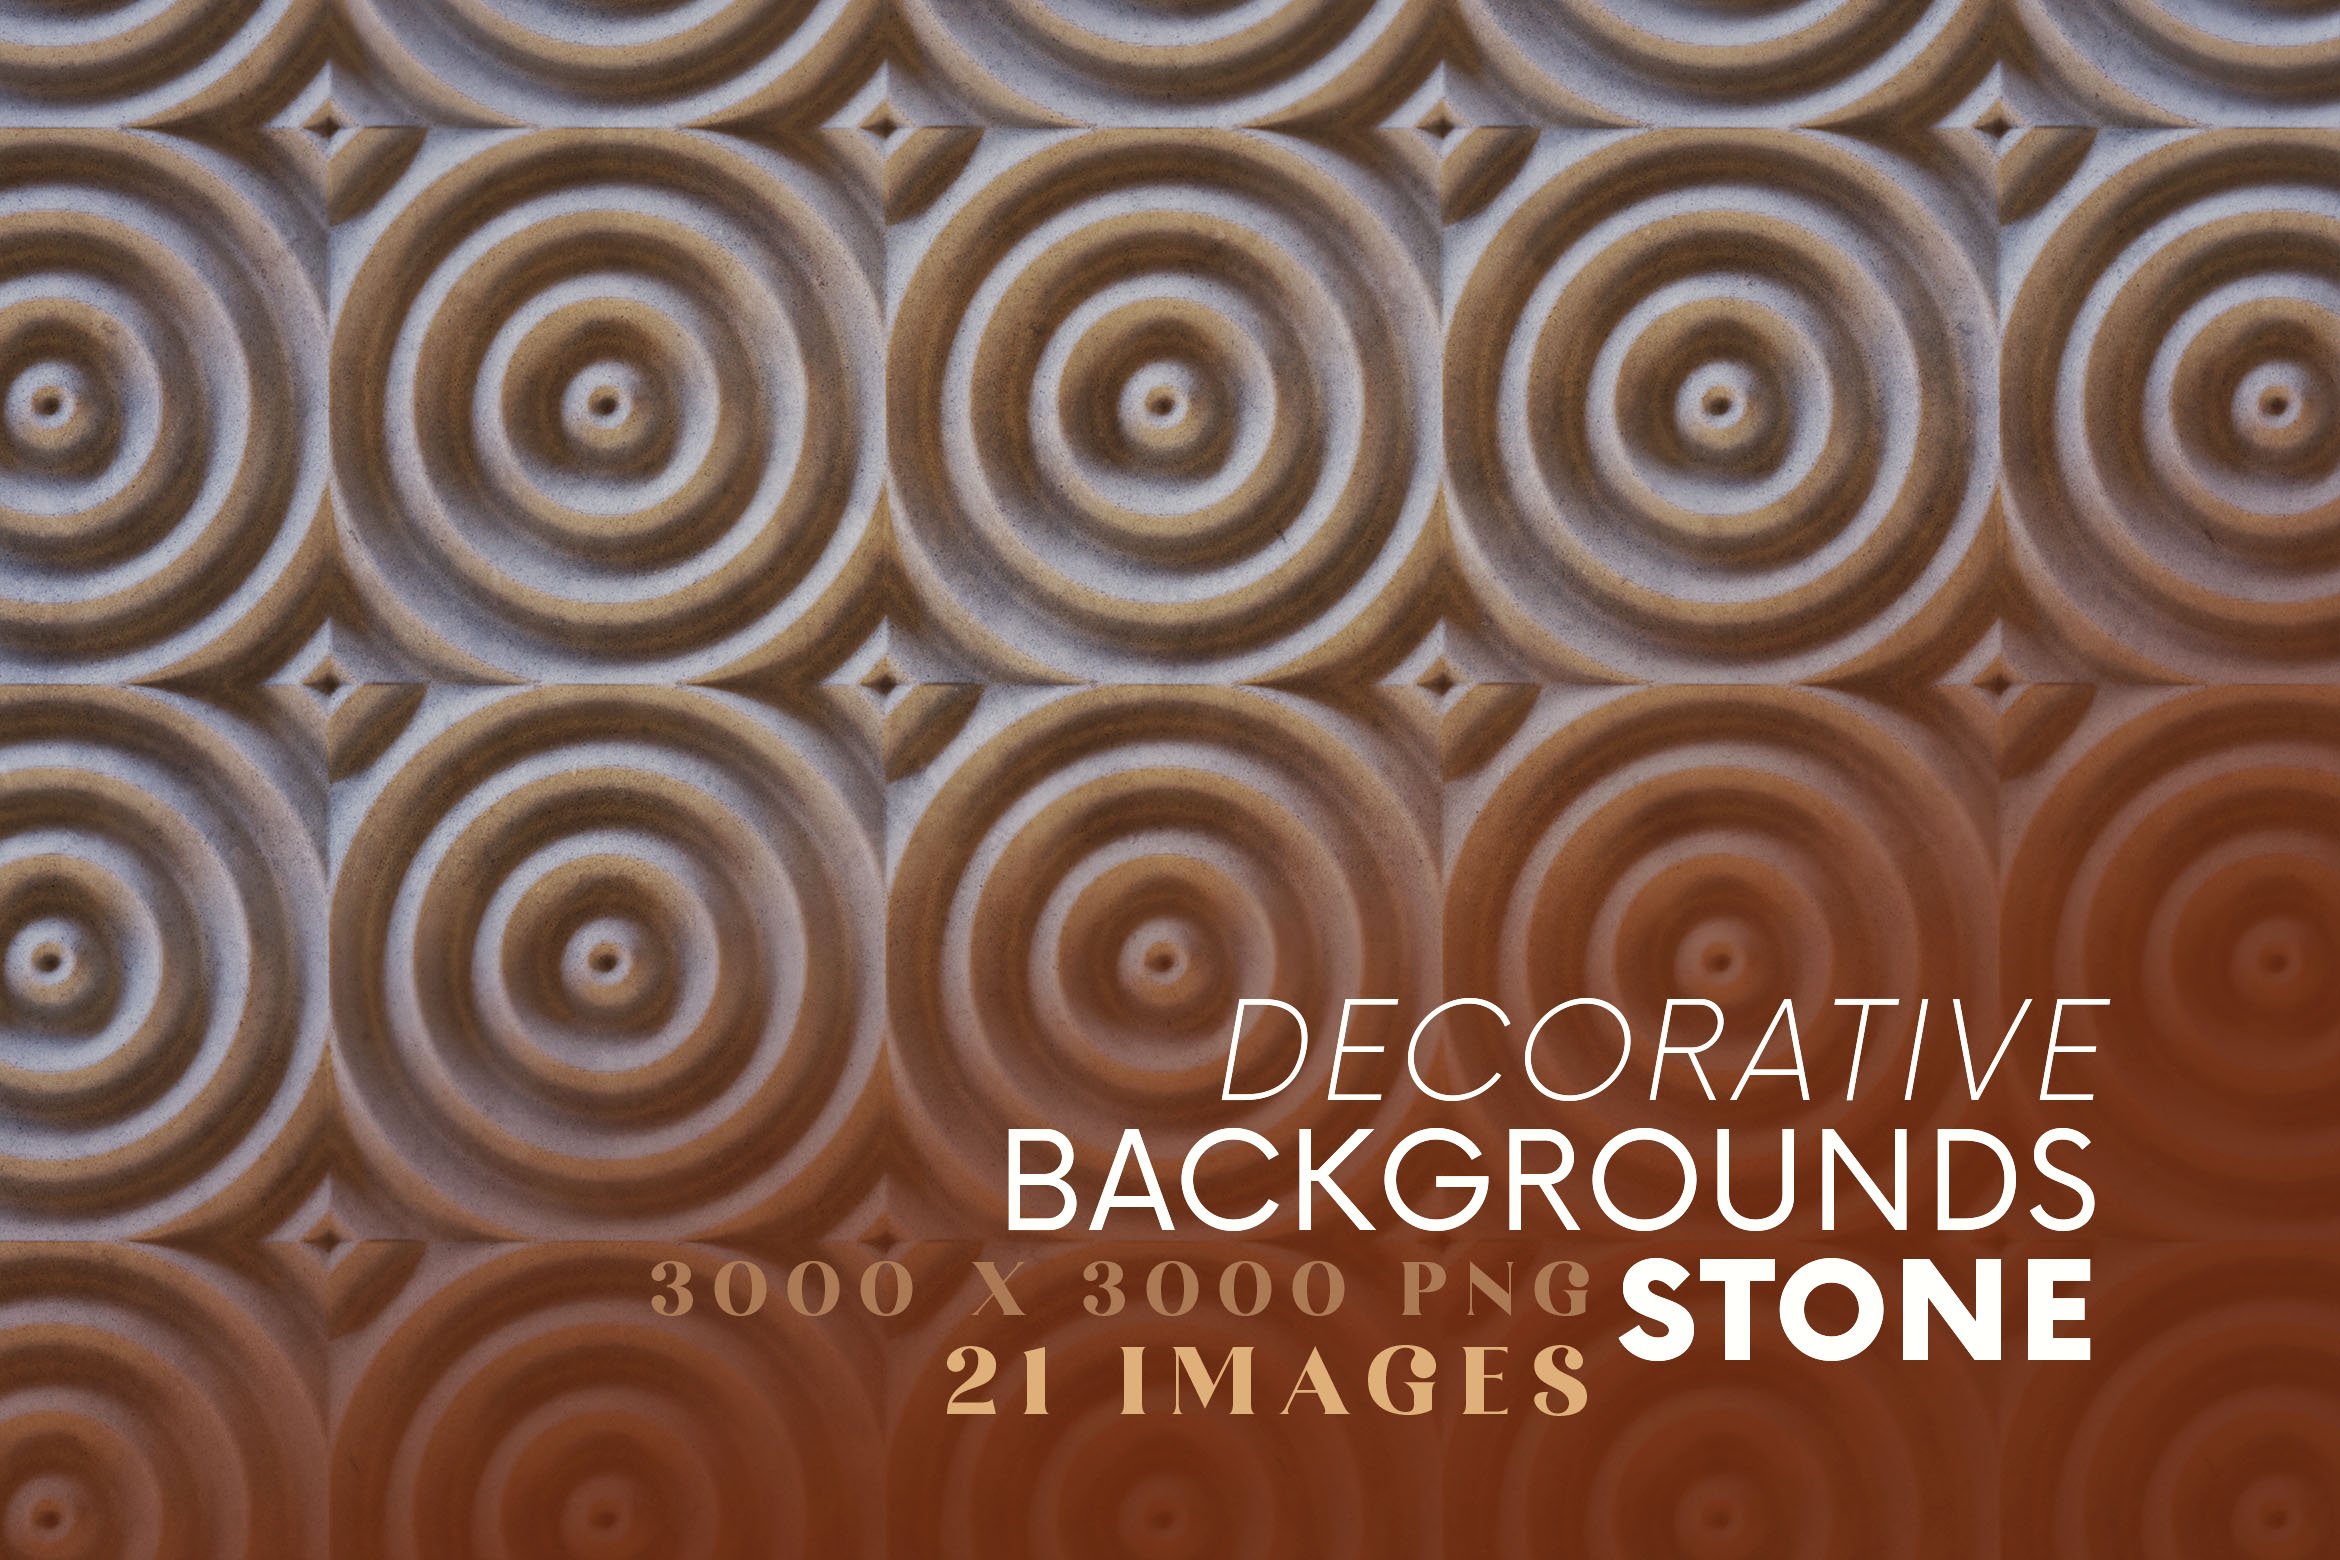 Decorative Backgrounds - Stone cover image.